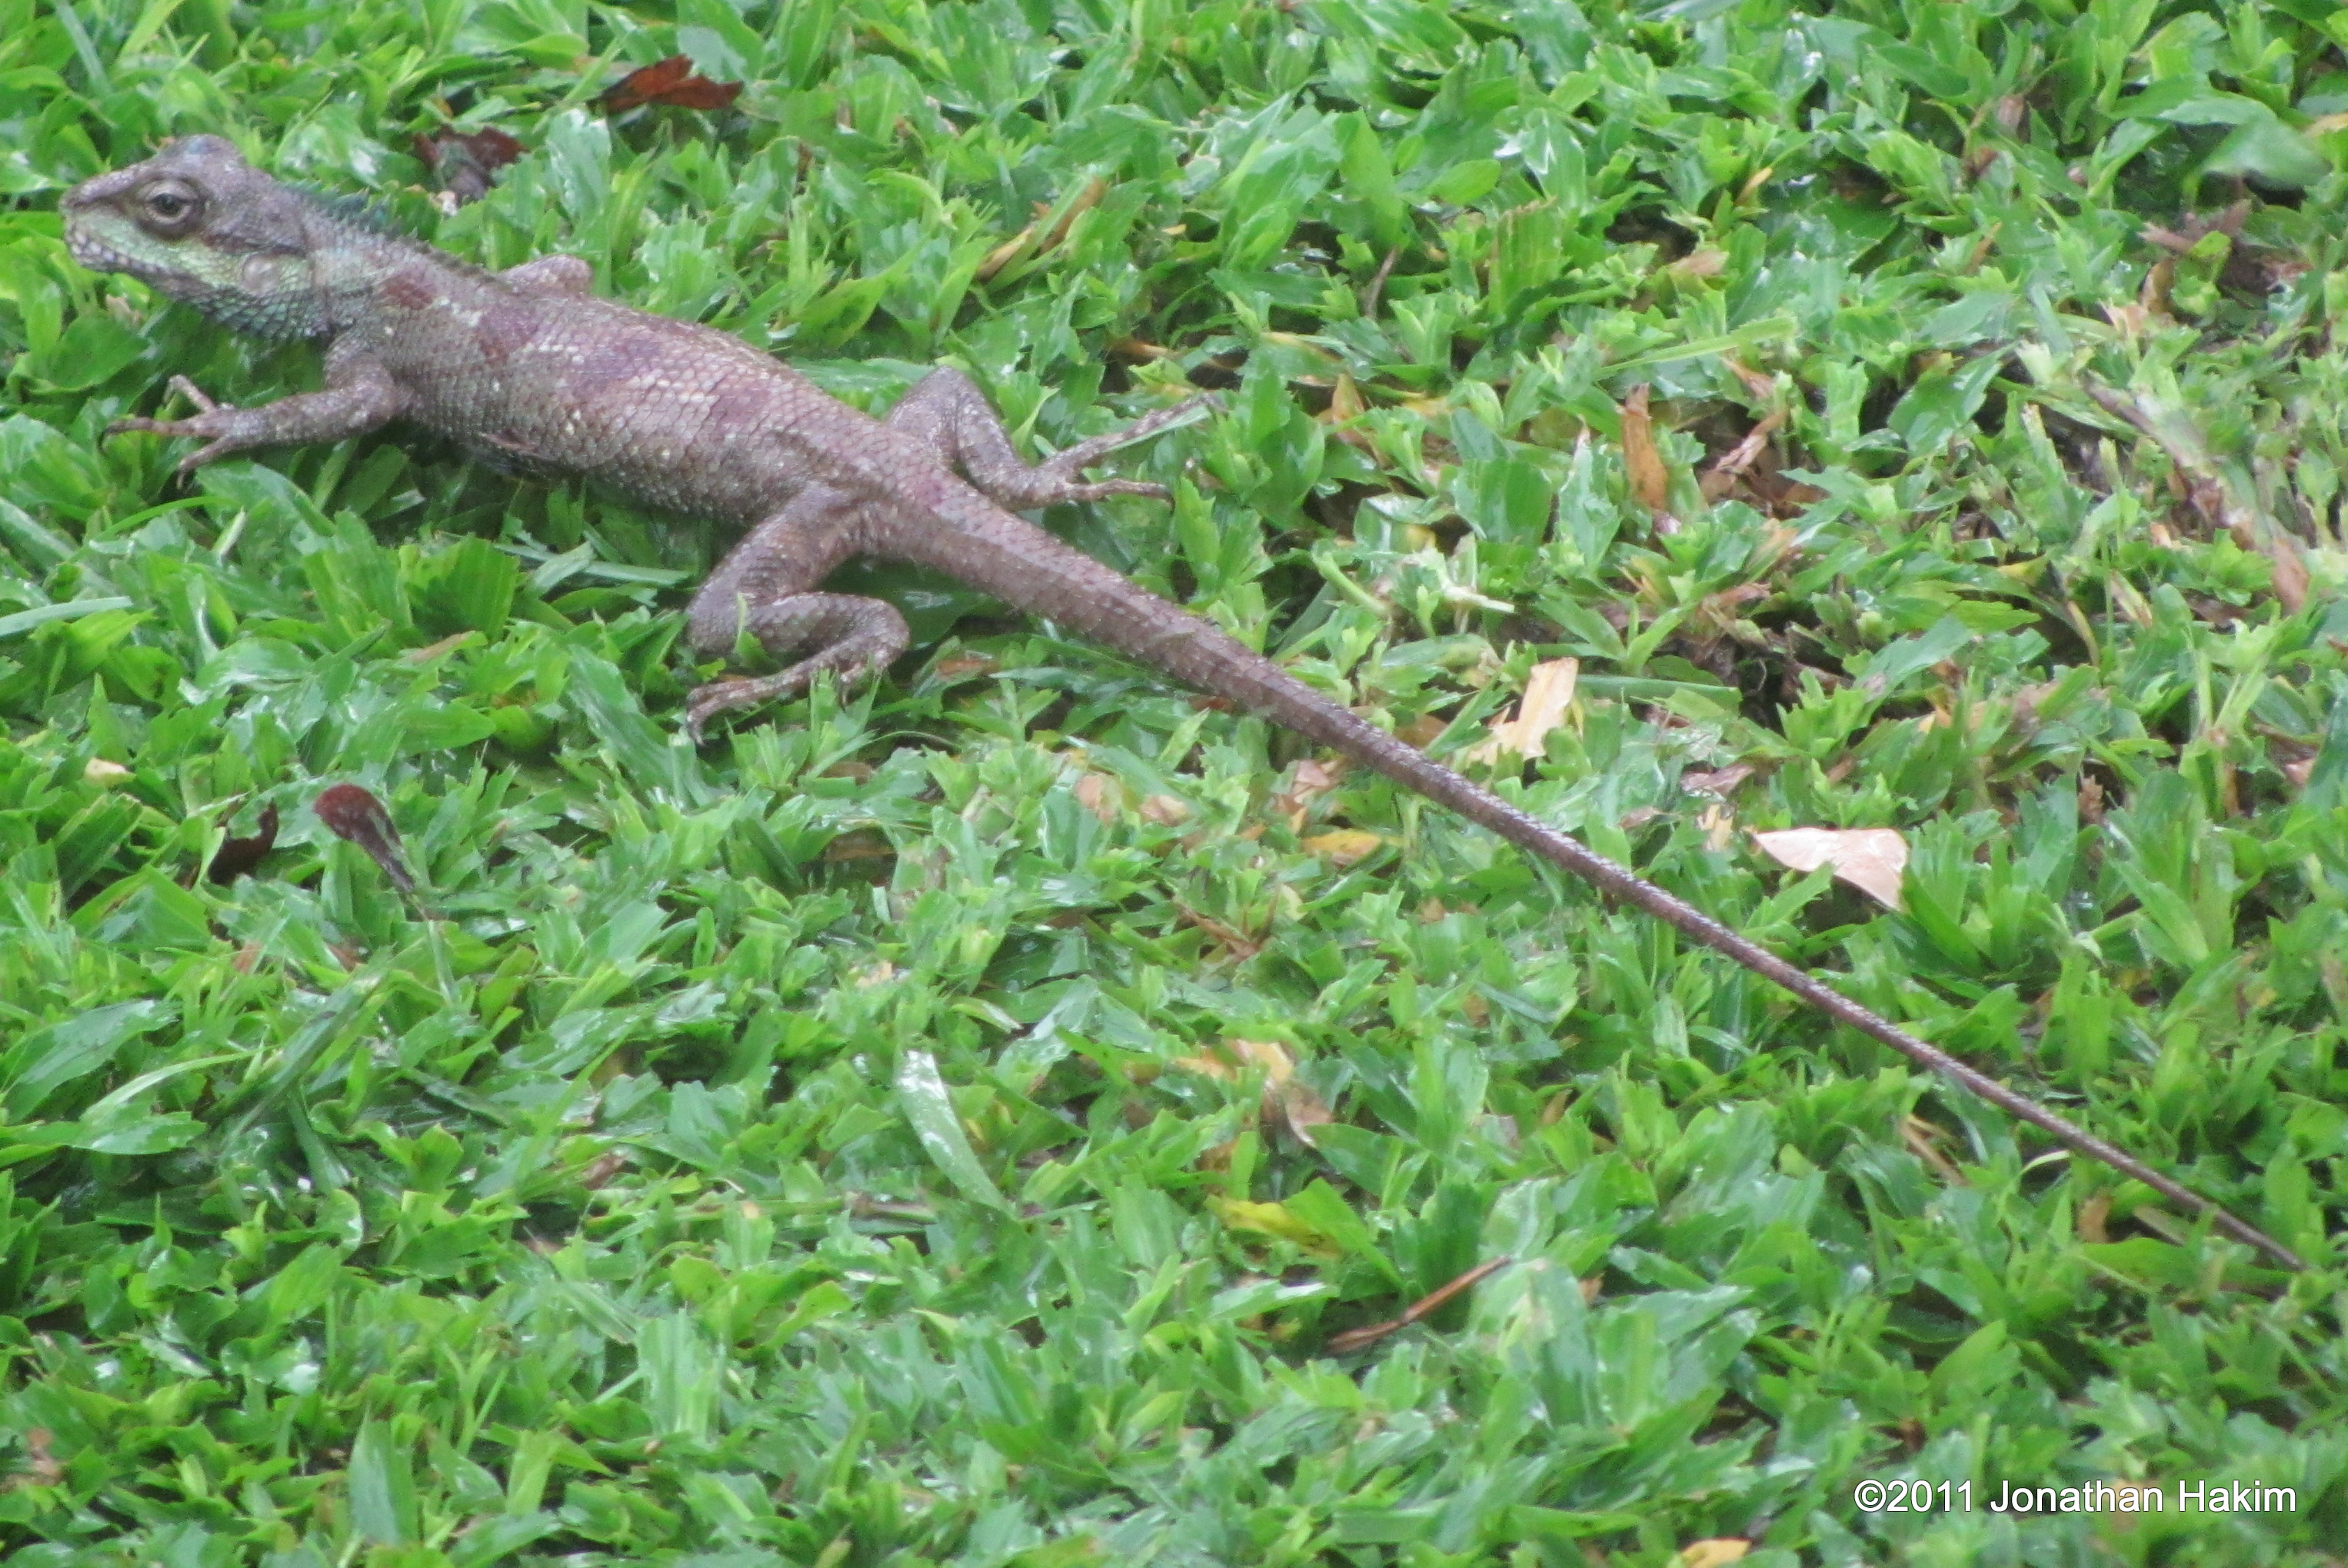 Indo-Chinese Forest Lizard | Reptiles and Amphibians of Bangkok